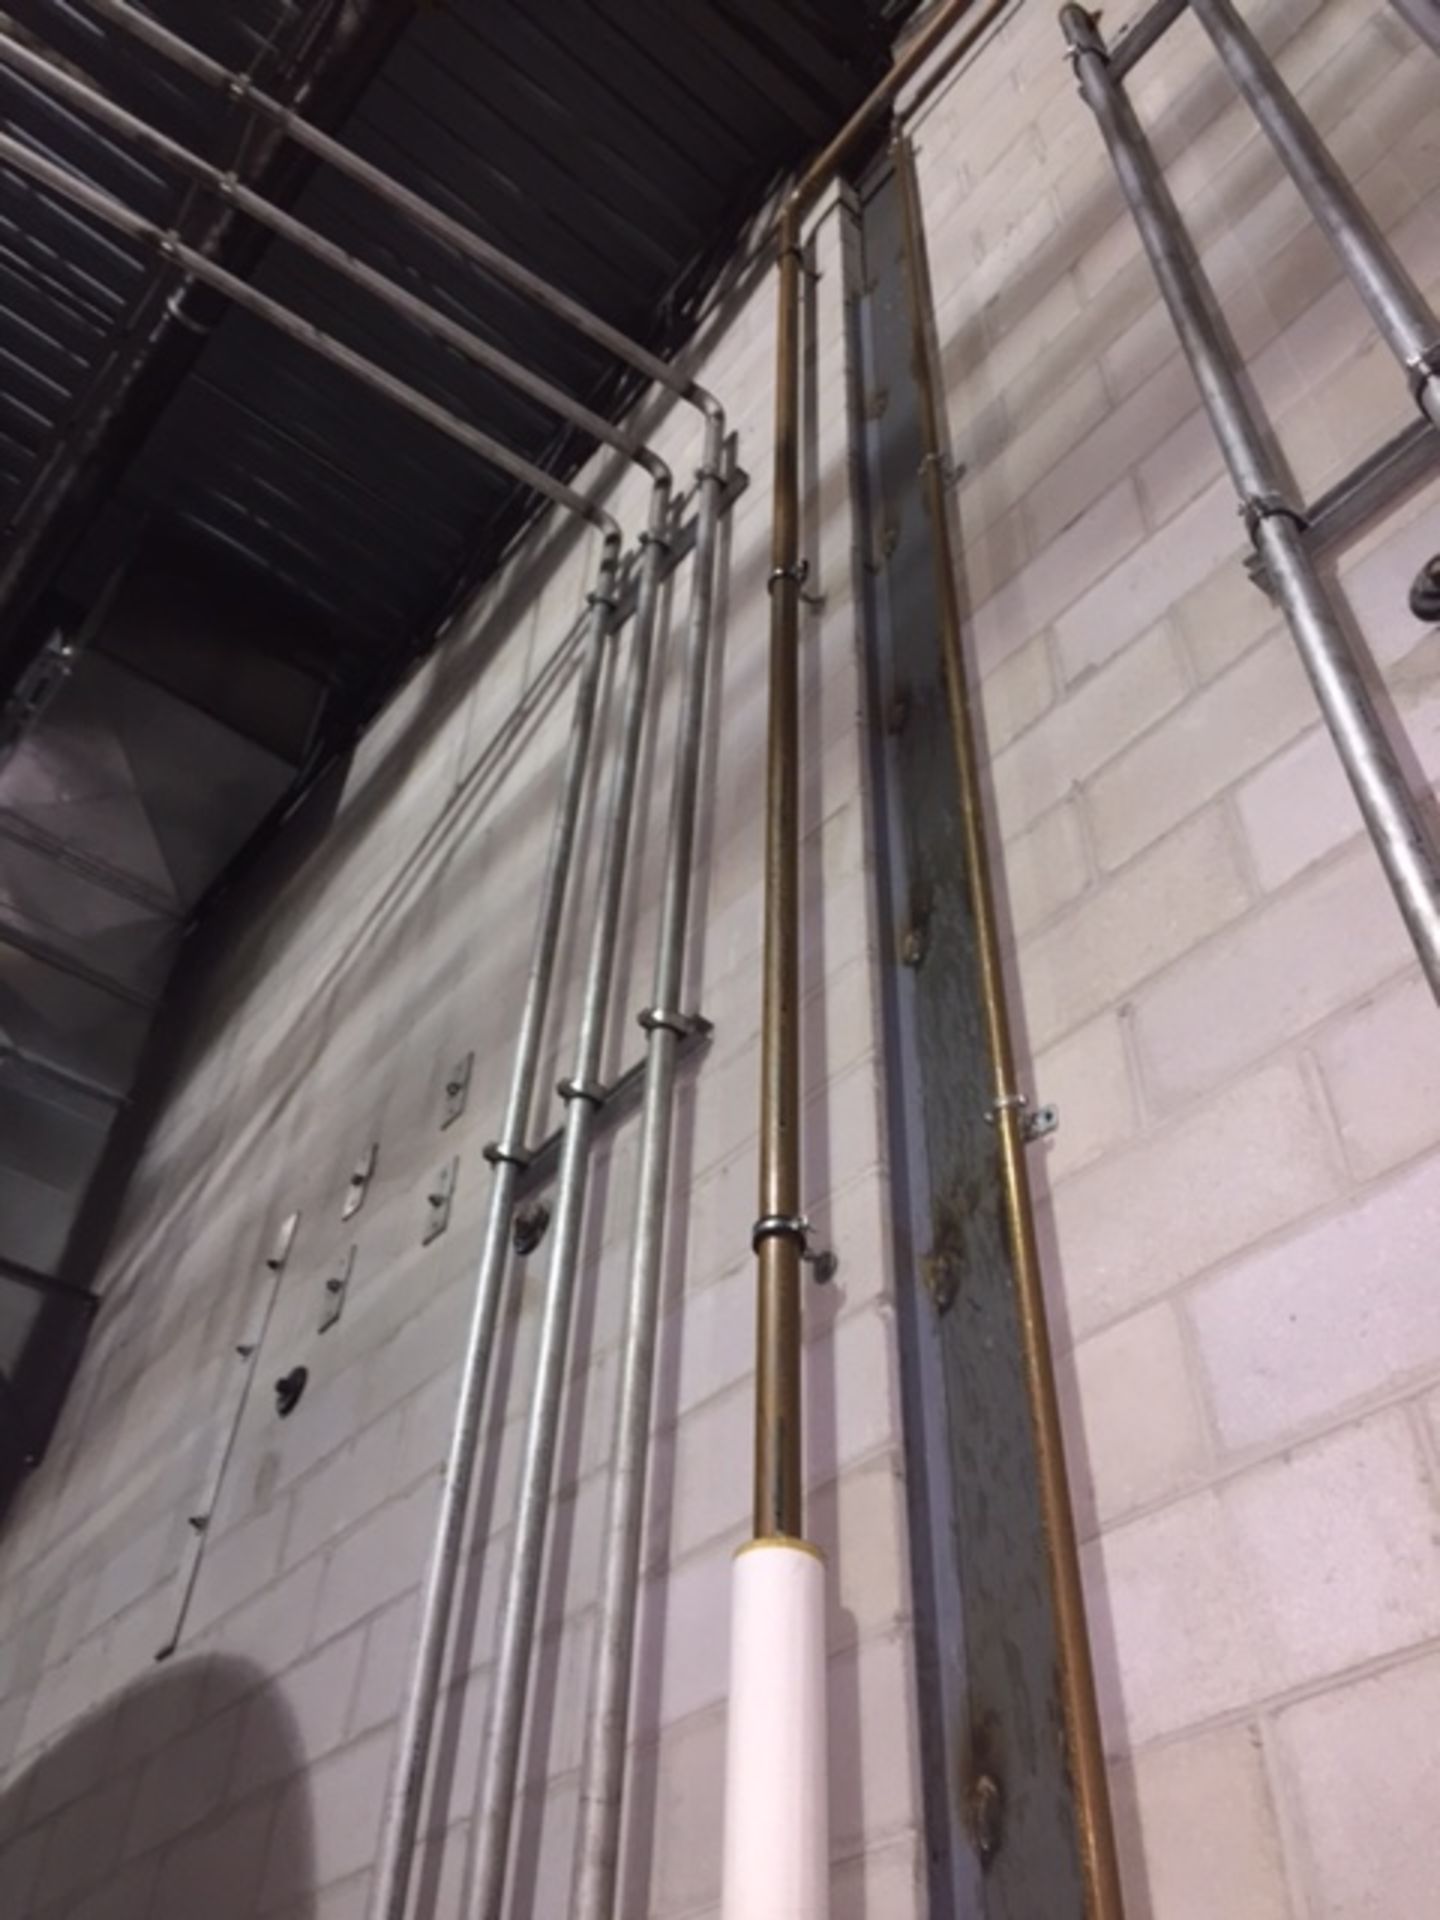 Installed S/S Piping in Tank Farm Area, Includes Valves, Straight Sections, Verticals and - Image 2 of 4